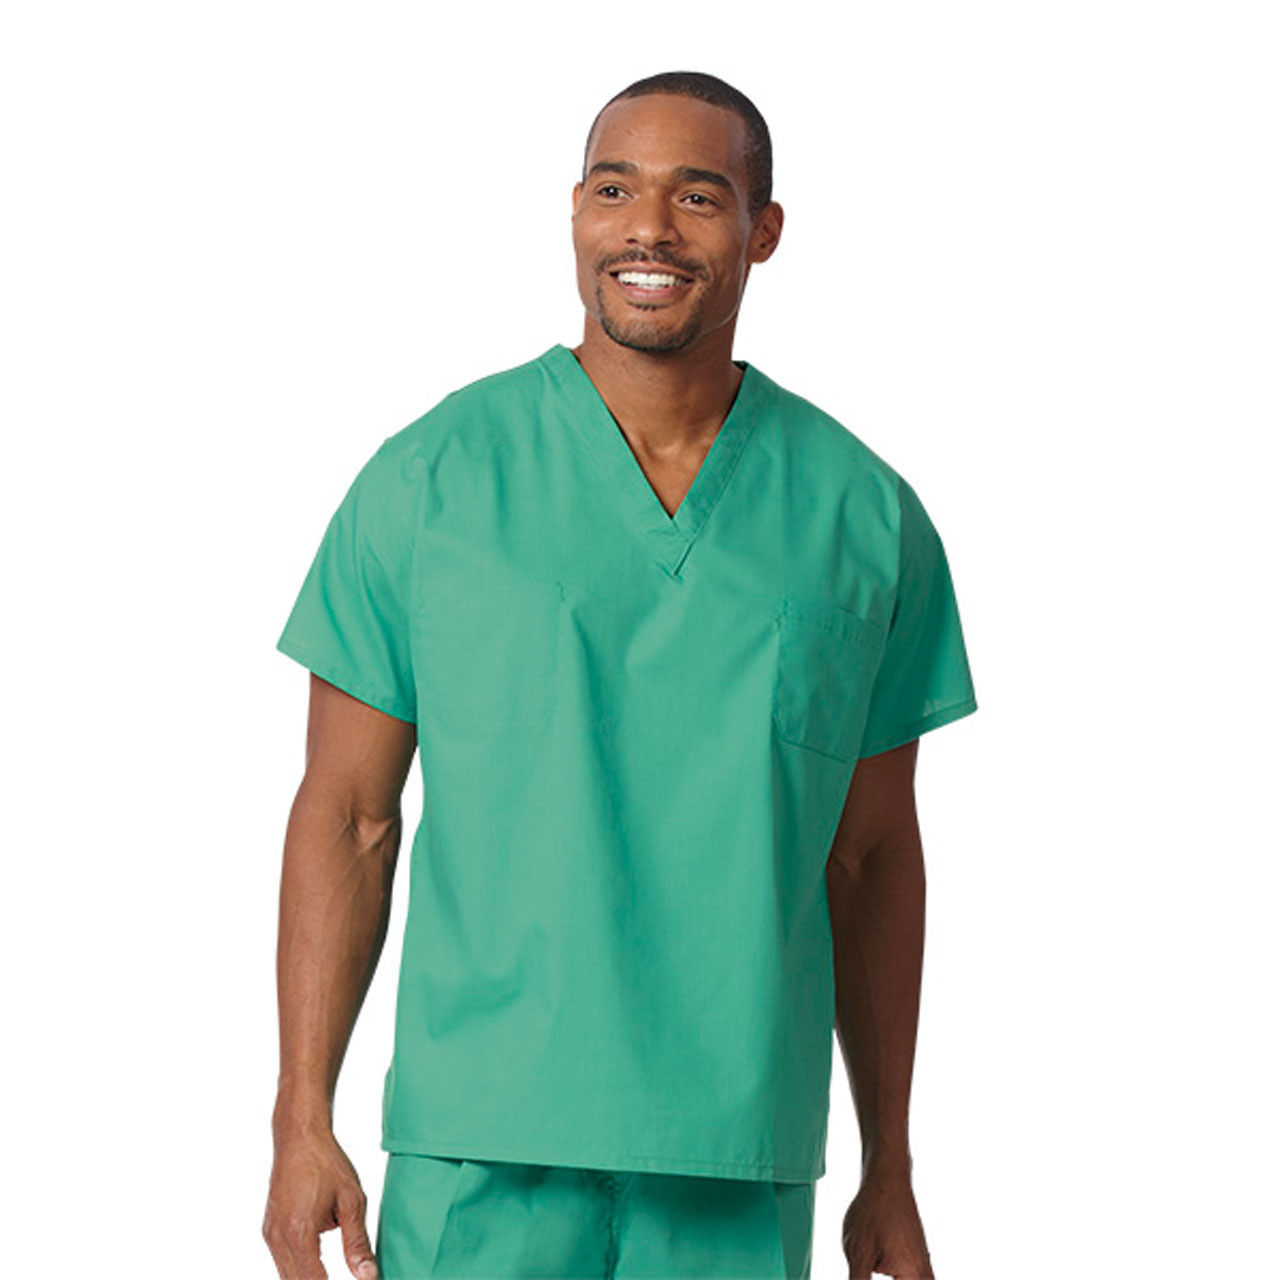 Unisex Reversible Wholesale Scrubs in Bulk, with Pocket, Jade - In Bulk of 12 or 72 Questions & Answers